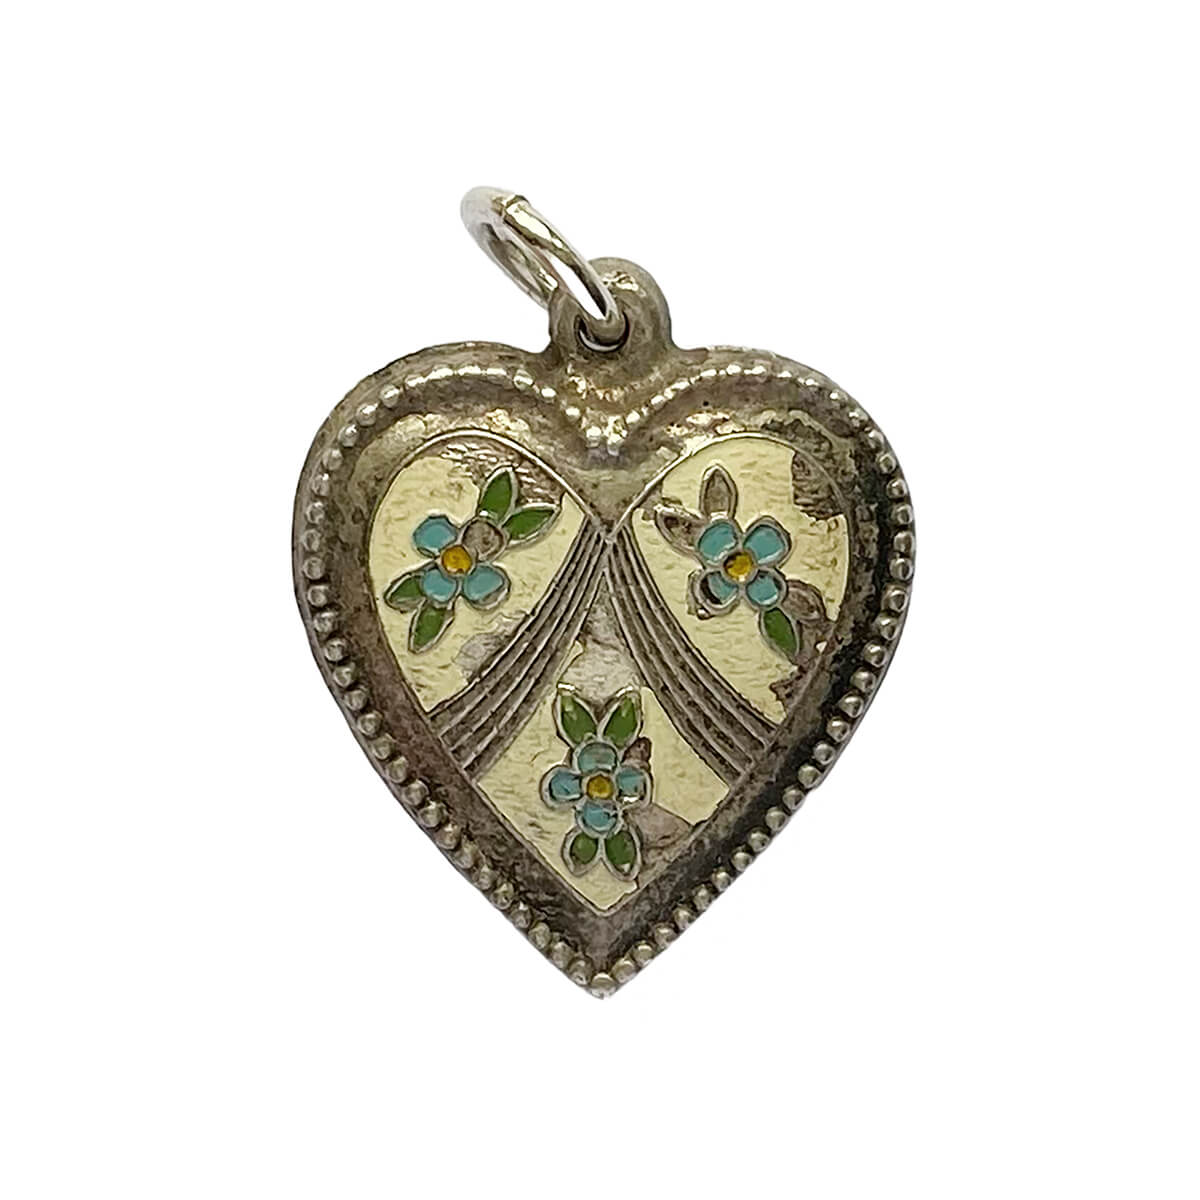 Vintage puffed heart charm with forget me not flowers sterling silver pendant from Charmarama